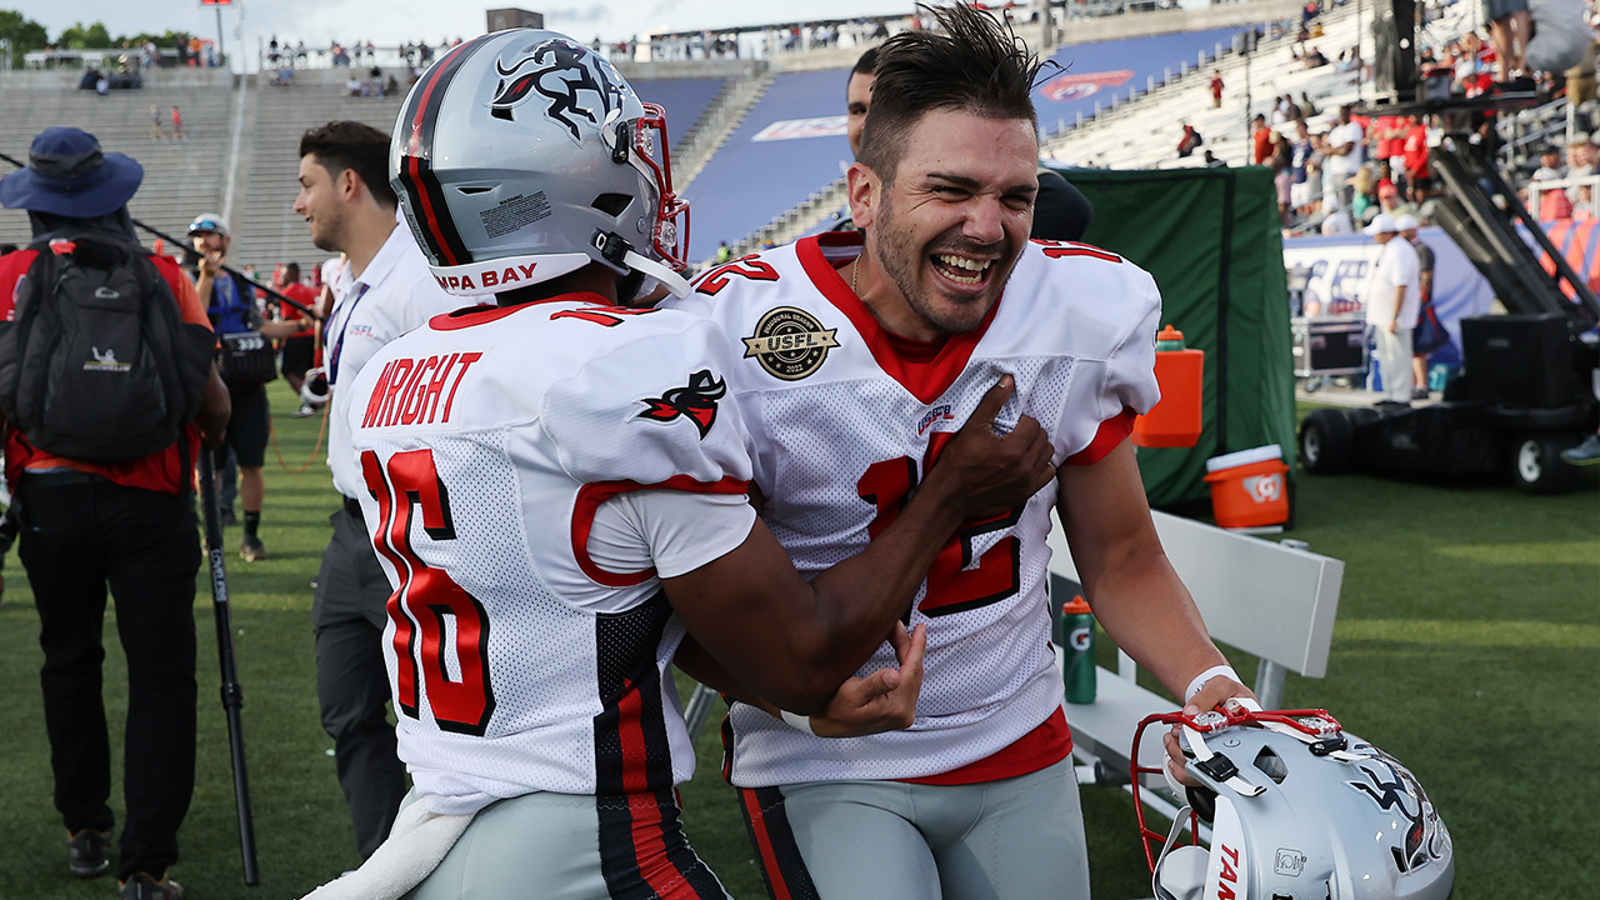 Tampa Bay Bandits complete comeback in 27-26 win over Houston Gamblers